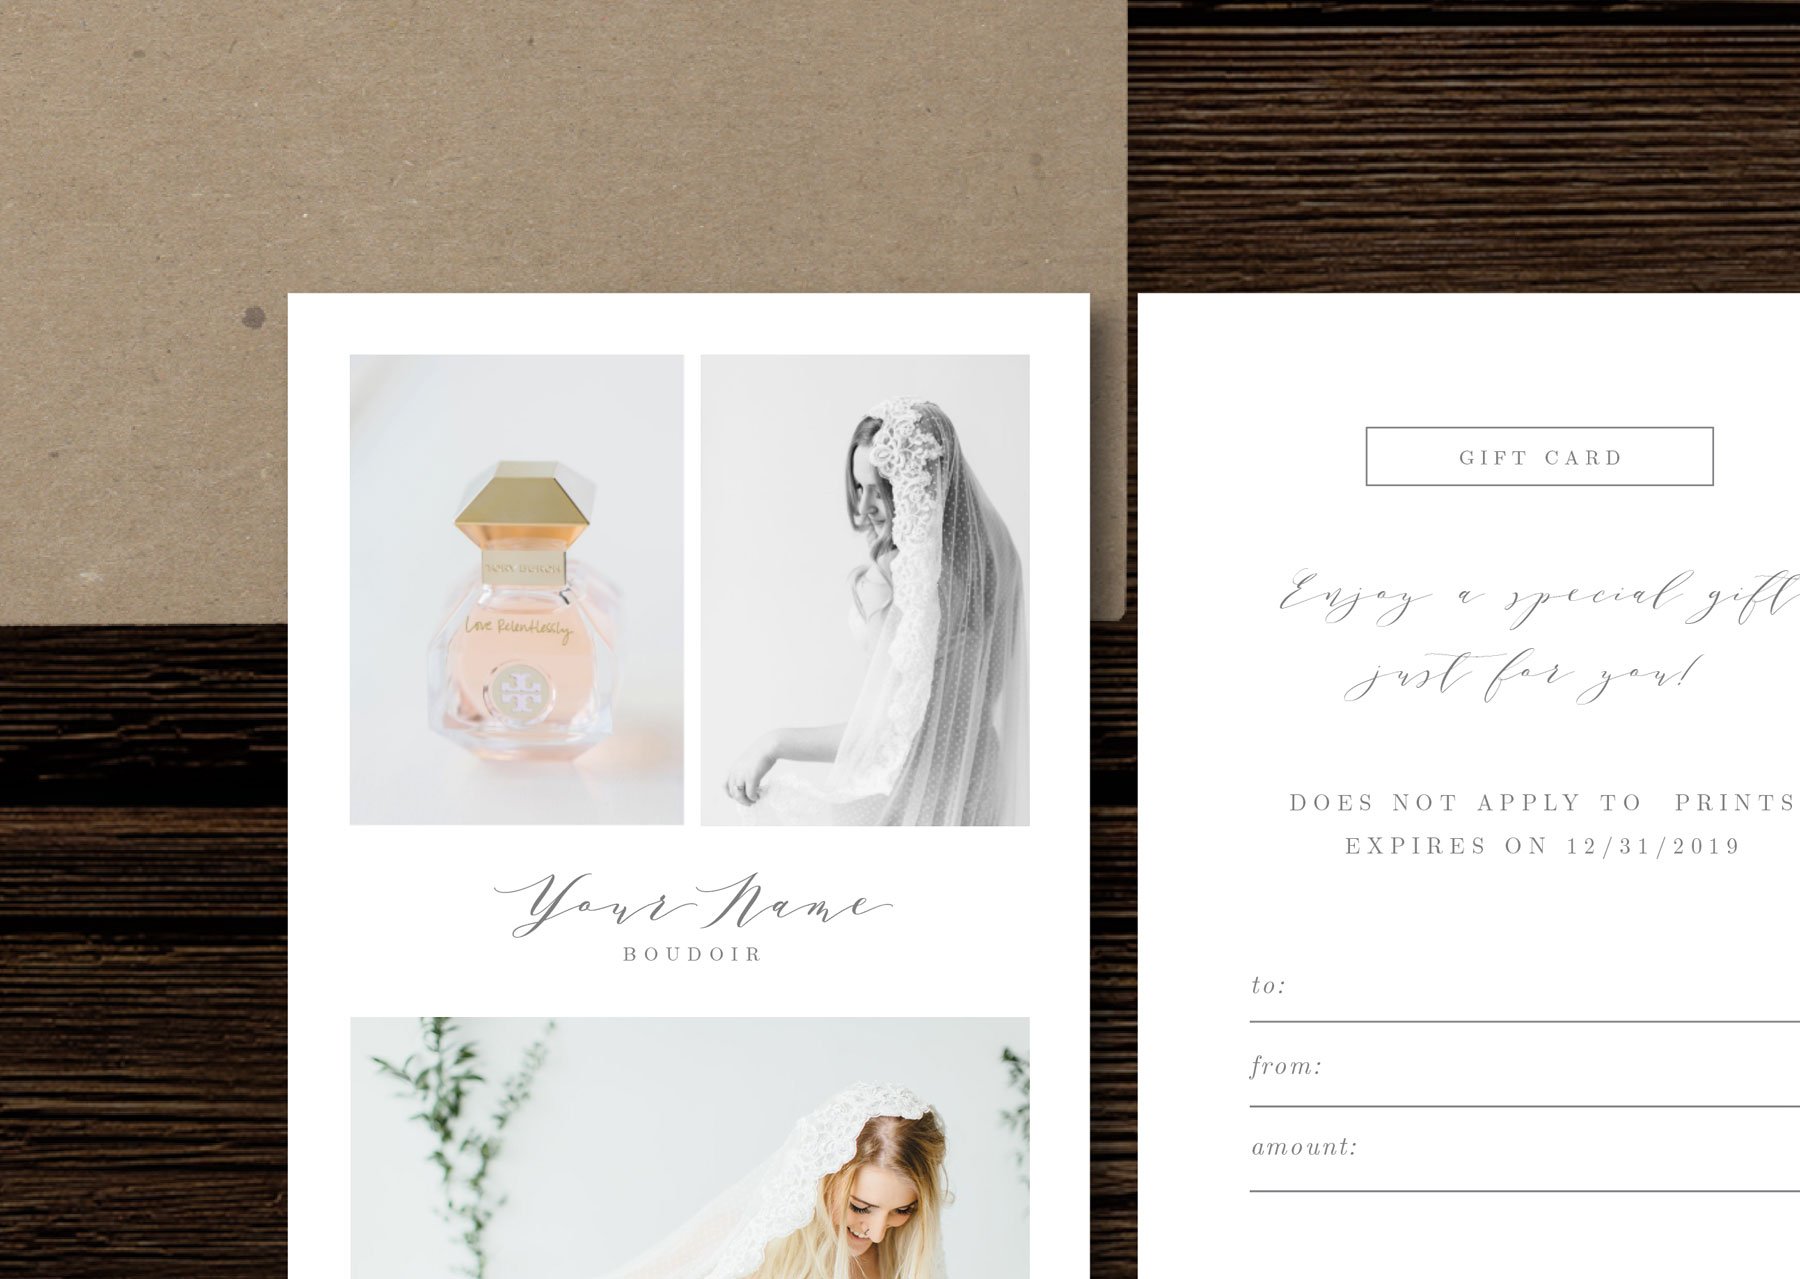 Boudoir Gift Certificate Template preview image.